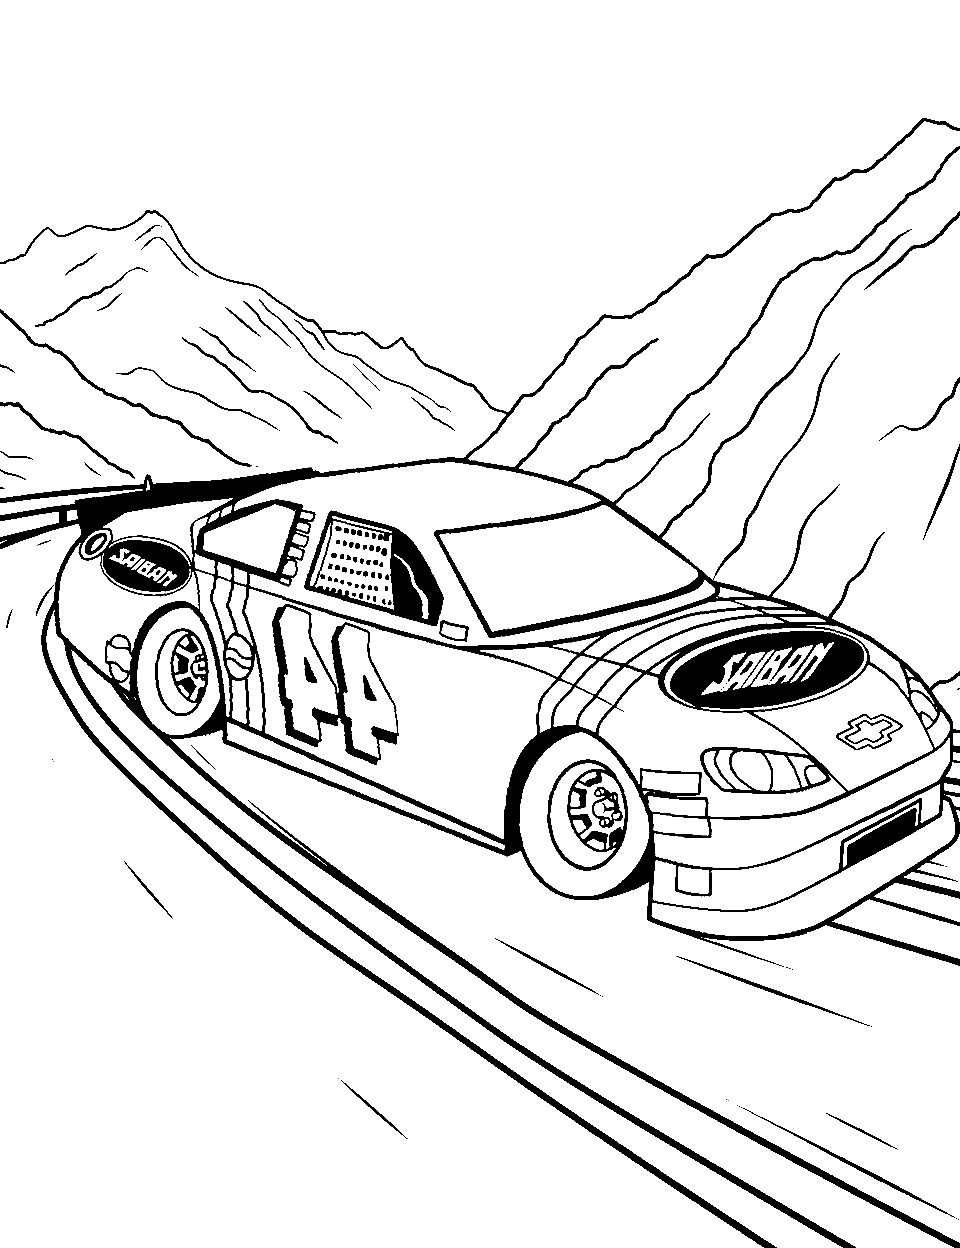 Rally Racing Race Car Coloring Page - A car participating in a rally race through mountain terrains.